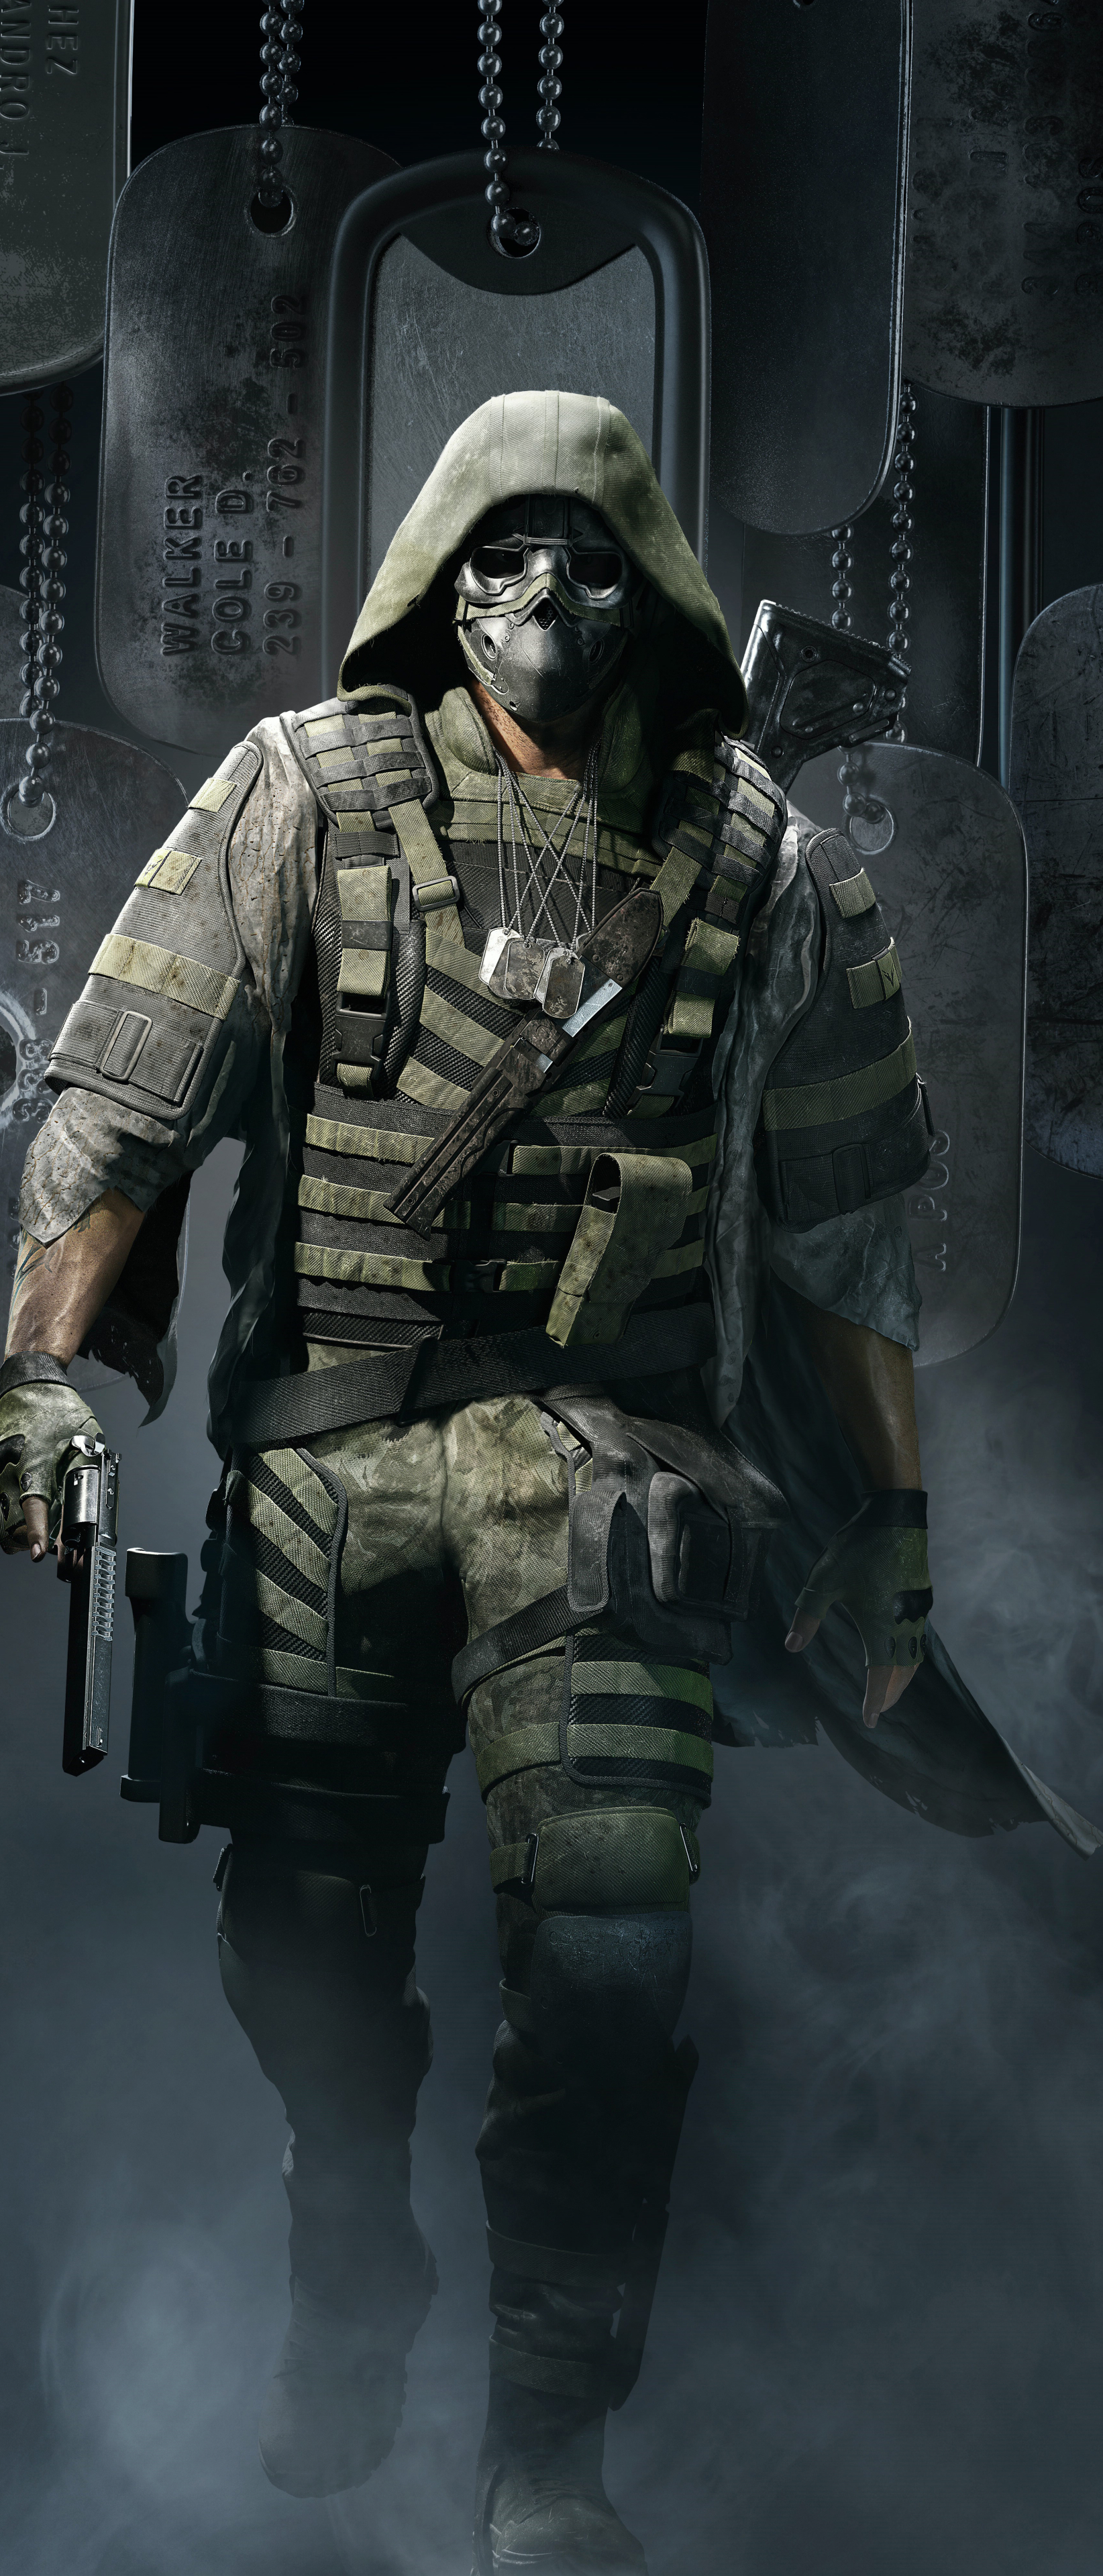 Tom Clancy's Ghost Recon Breakpoint Phone Wallpaper